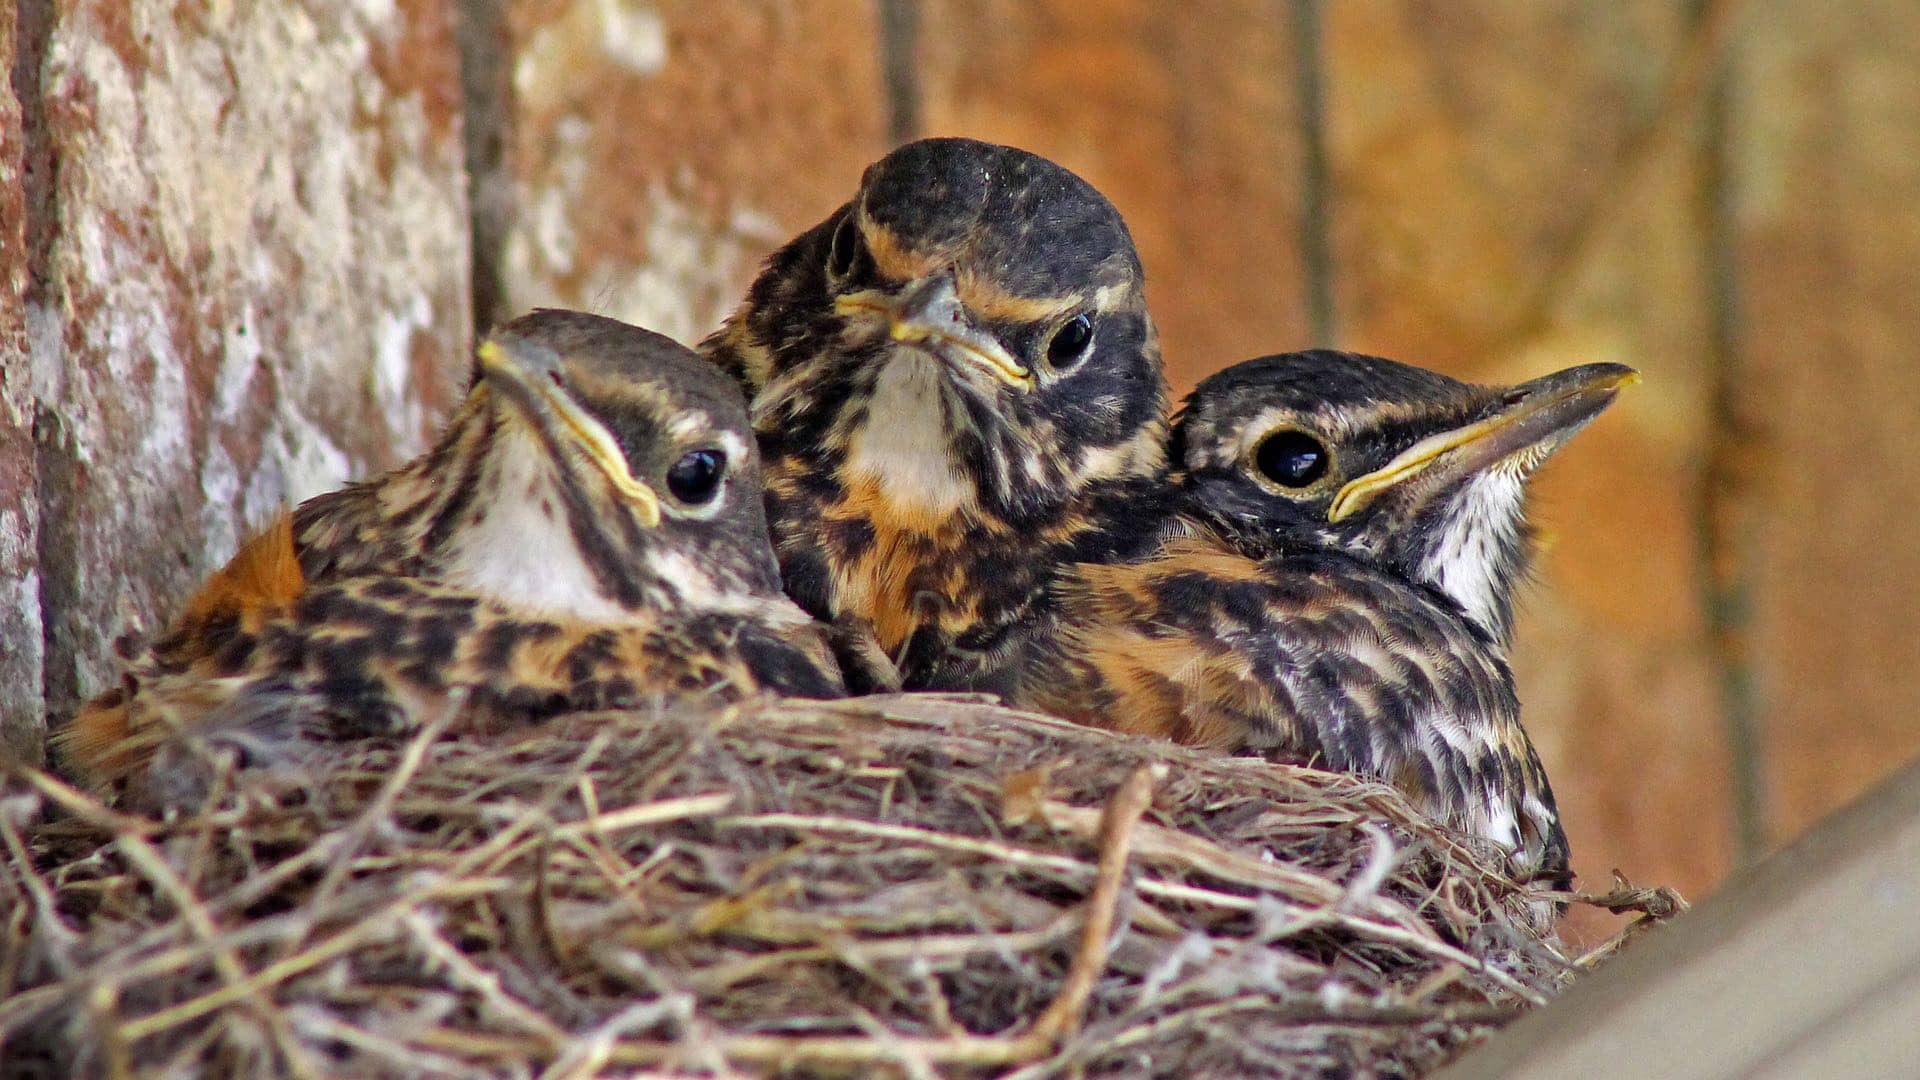 Image: Baby Robins in a nest, clean of poop